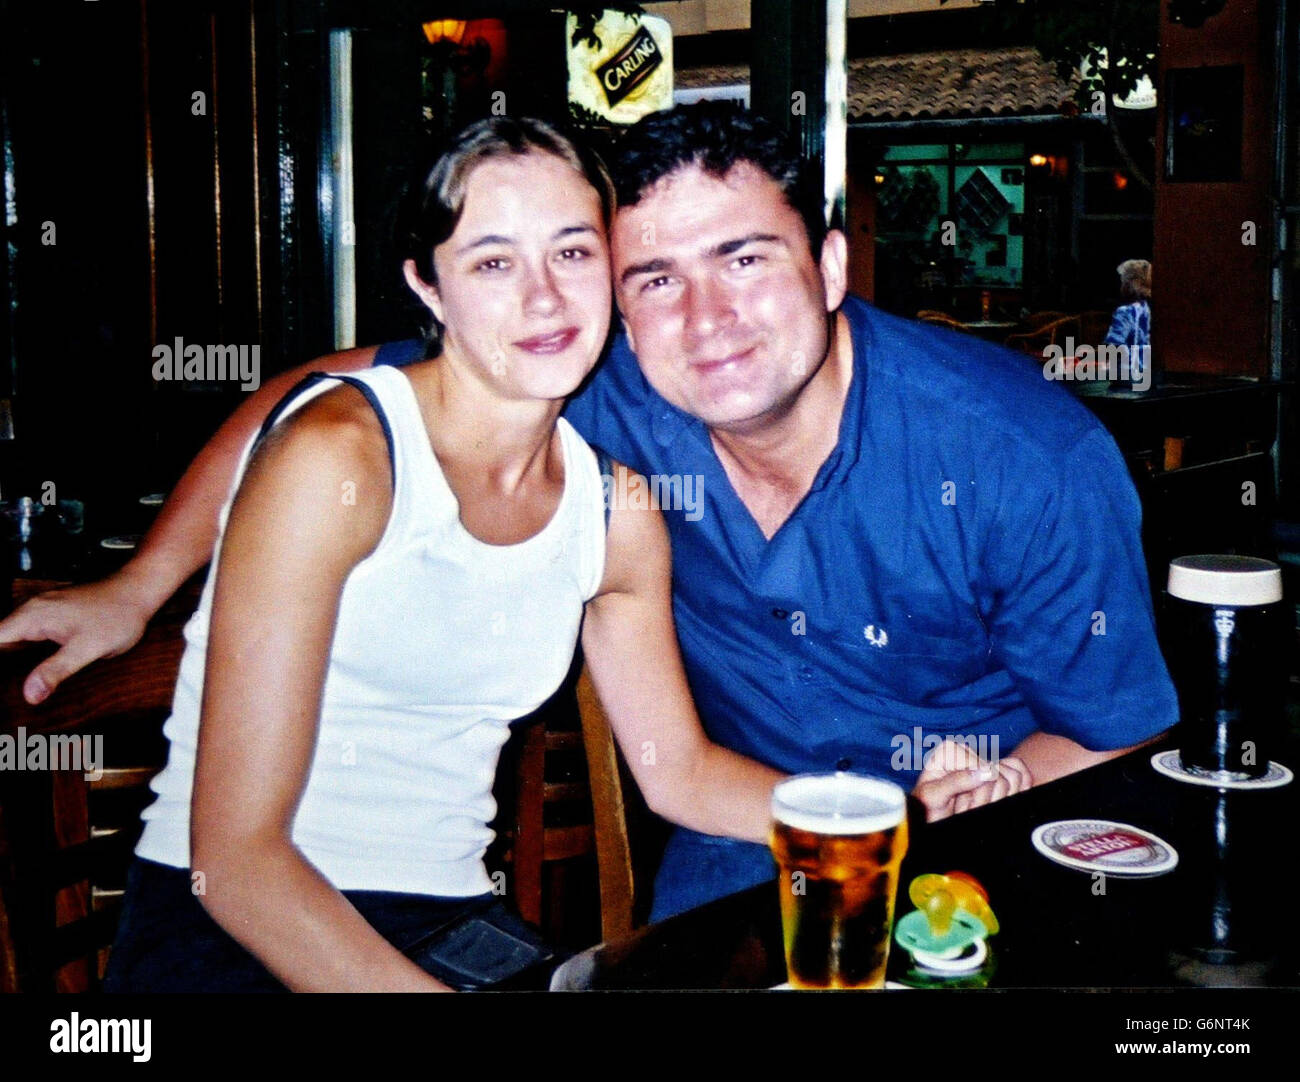 Collect picture of Andrew Hollingworth, 31, with fiancee Georgina. Mr Hollingworth is trapped in China after being accused of failing to pay a debt, it emerged. Hollingworth, 31, of Droylsden, Manchester, has been wrongly accused of owing eight million US dollars to a Chinese supplier, according to his father. Stock Photo